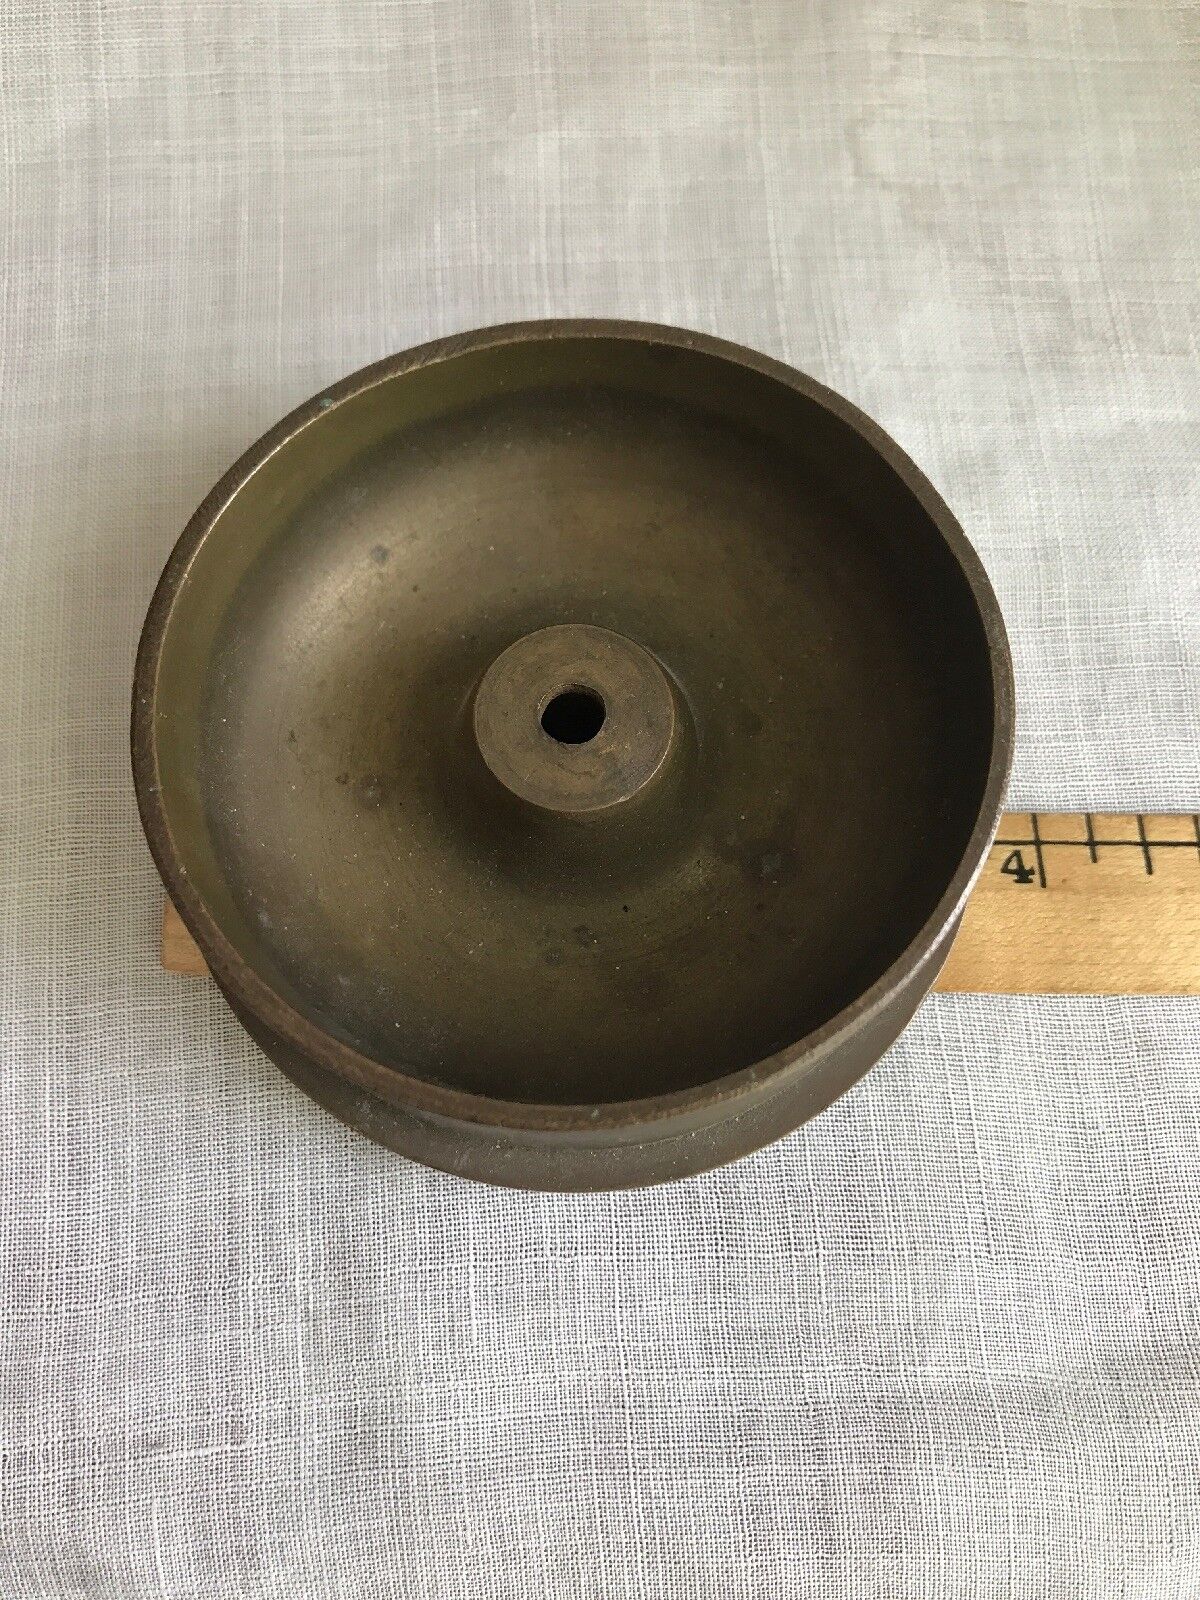 Vintage WWII Japanese Military Shell Brass Trench Art Artillery Canister ashtray